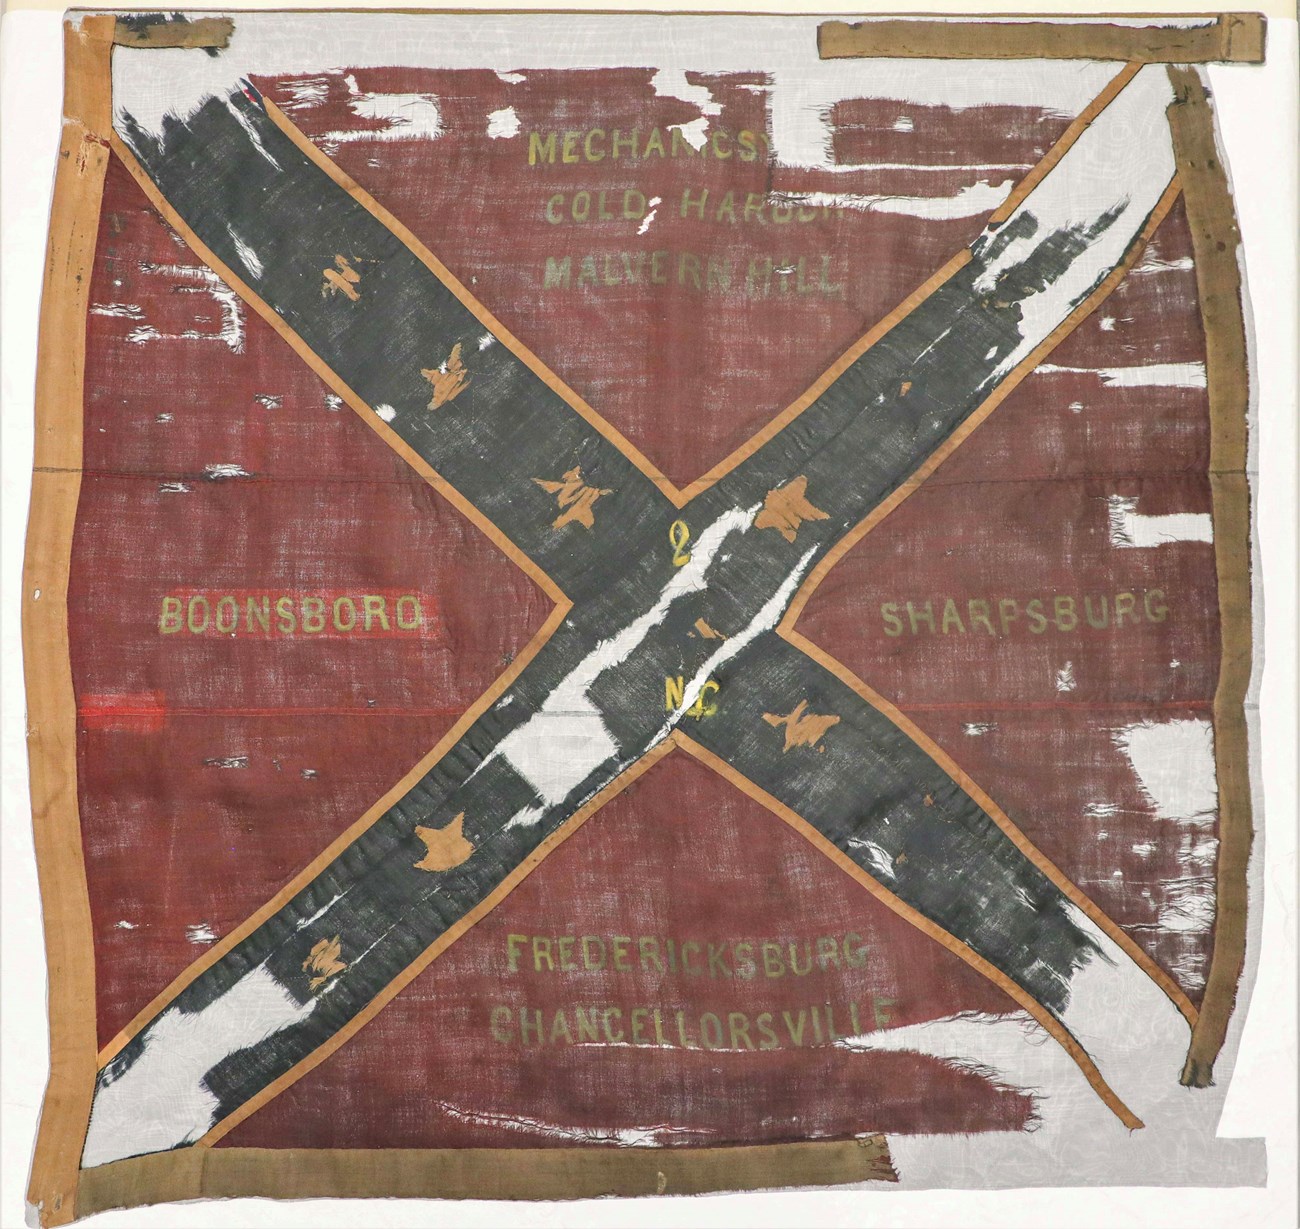 A red square flag with a Blue X on it, with gold stars in the X and the words "Boonsboro", "Mechanics, Cold Harbor, Malvern Hill", "Sharpsburg", and "Fredericksburg, Chancellorsville" on it.